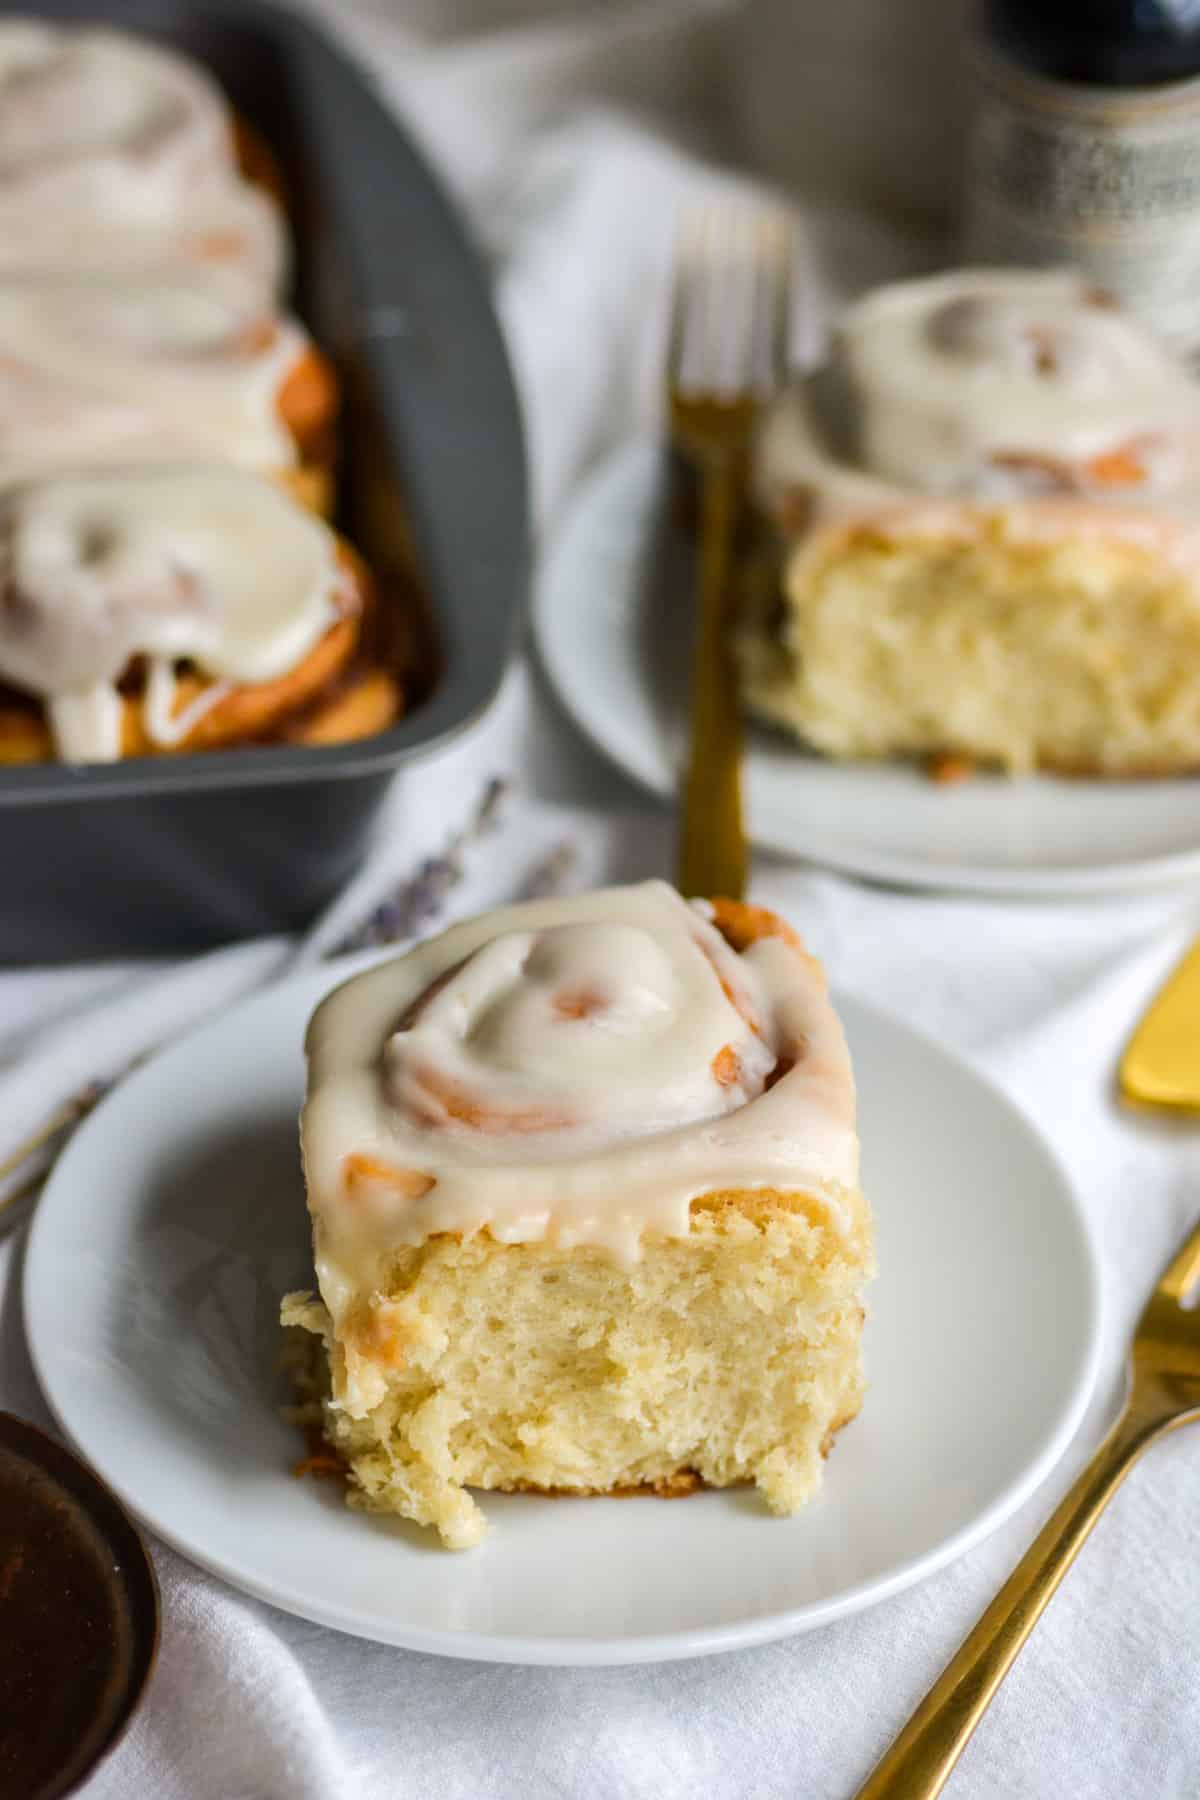 Eggless Vegan Cinnamon Roll with cream cheese frosting on a small plate with more cinnamon rolls in the background.